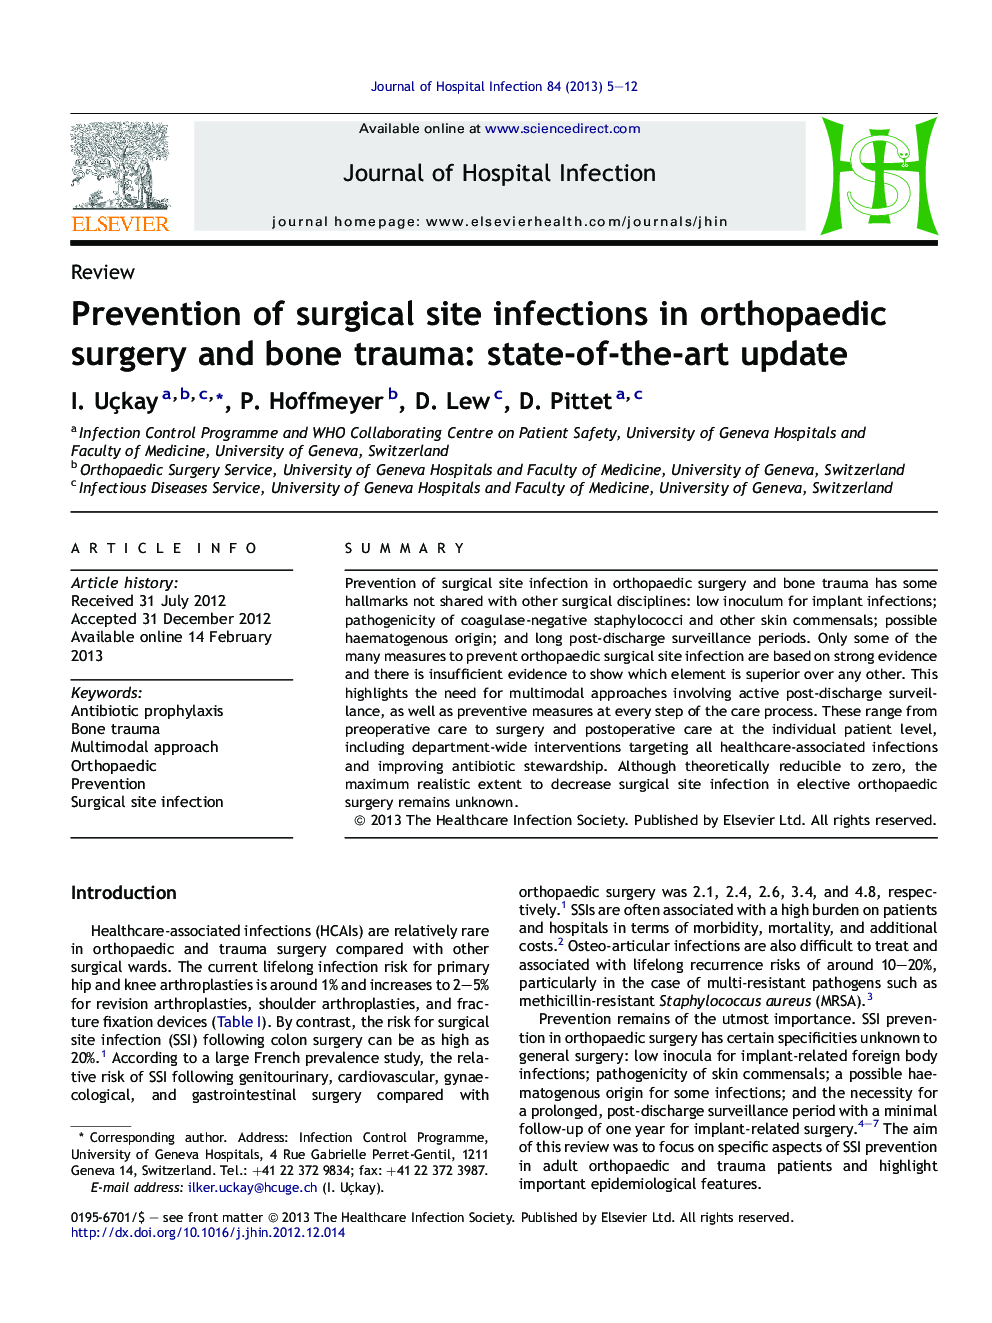 Prevention of surgical site infections in orthopaedic surgery and bone trauma: state-of-the-art update